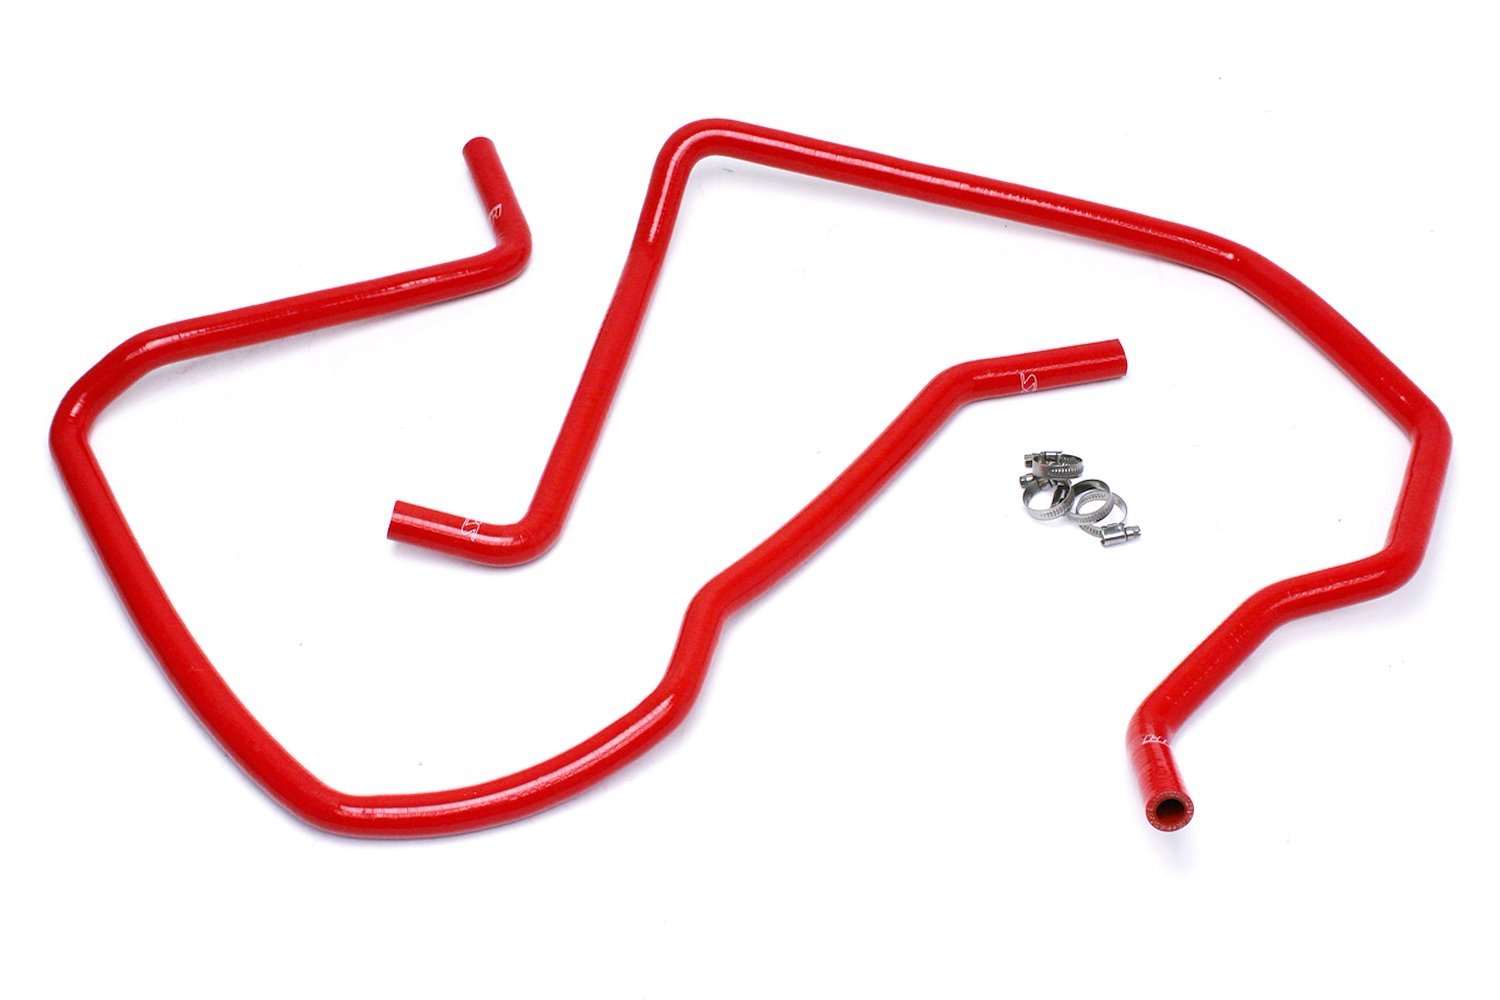 57-1498H-RED Heater Hose Kit, High-Temp 3-Ply Reinforced Silicone, Replace OEM Rubber Heater Coolant Hoses